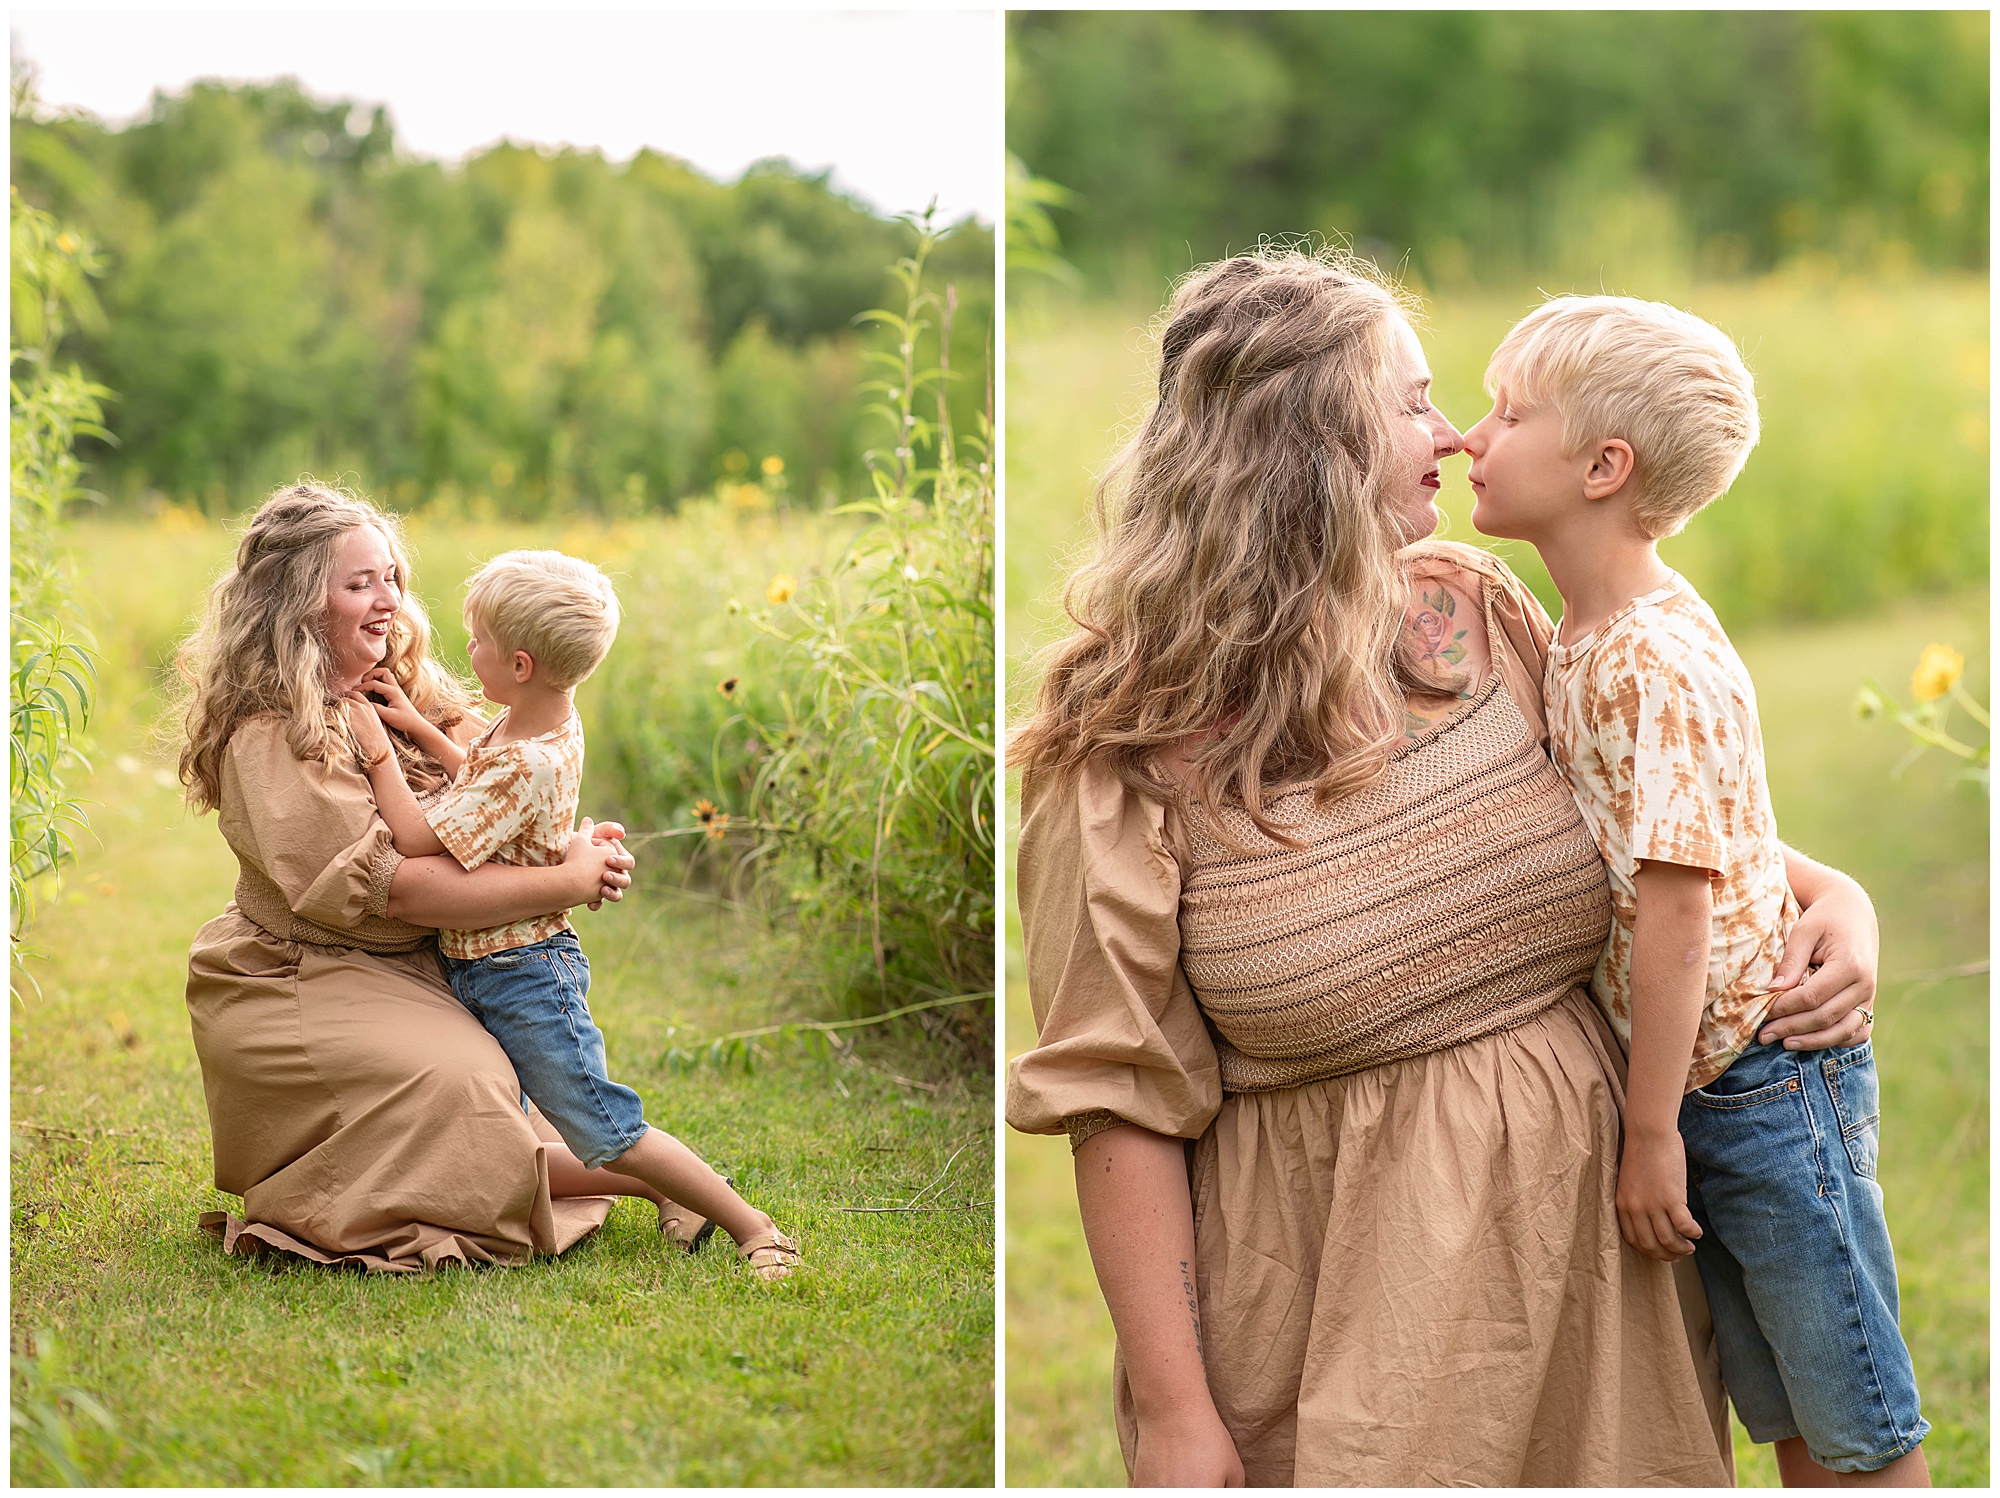 neutral color family photo outfits, mother and son
